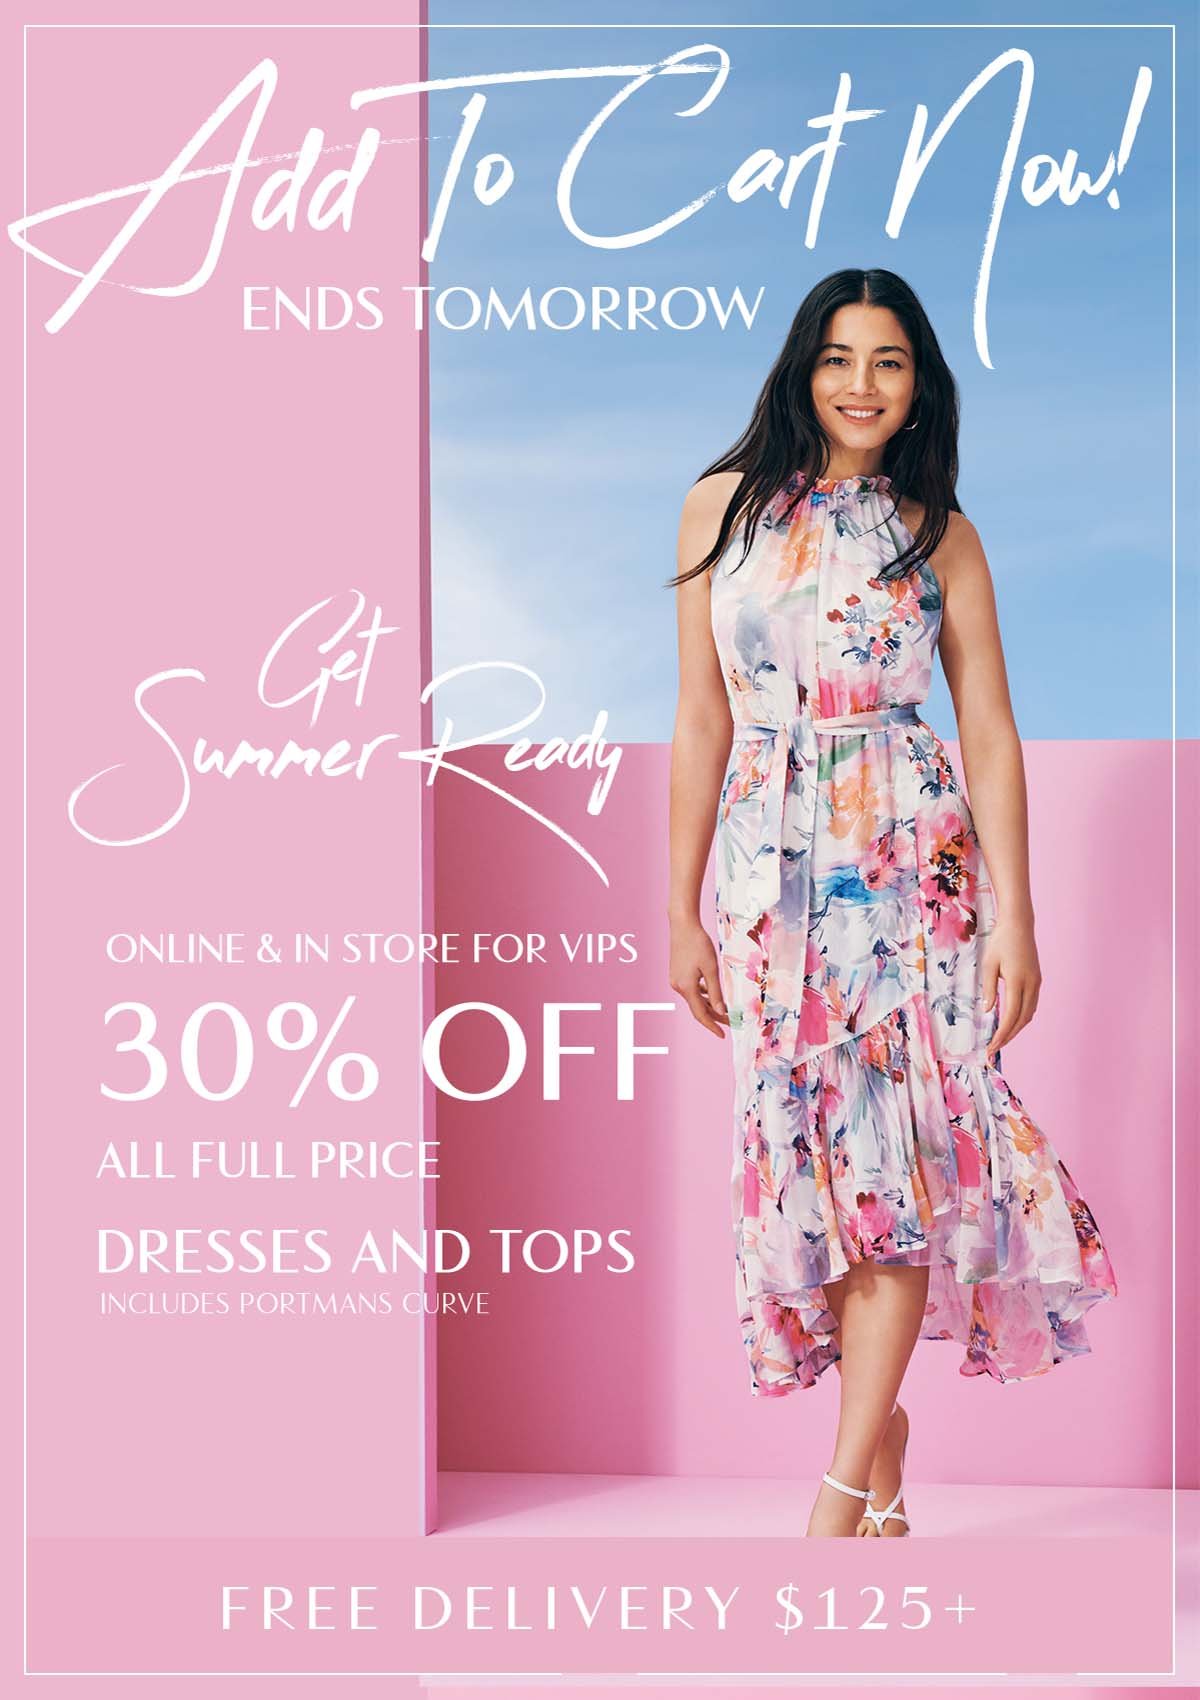 Get Summer Ready| Ends Tomorrow | 30% Off All Full Price Dresses and Tops including Portmans Curve + Free Delivery $125+